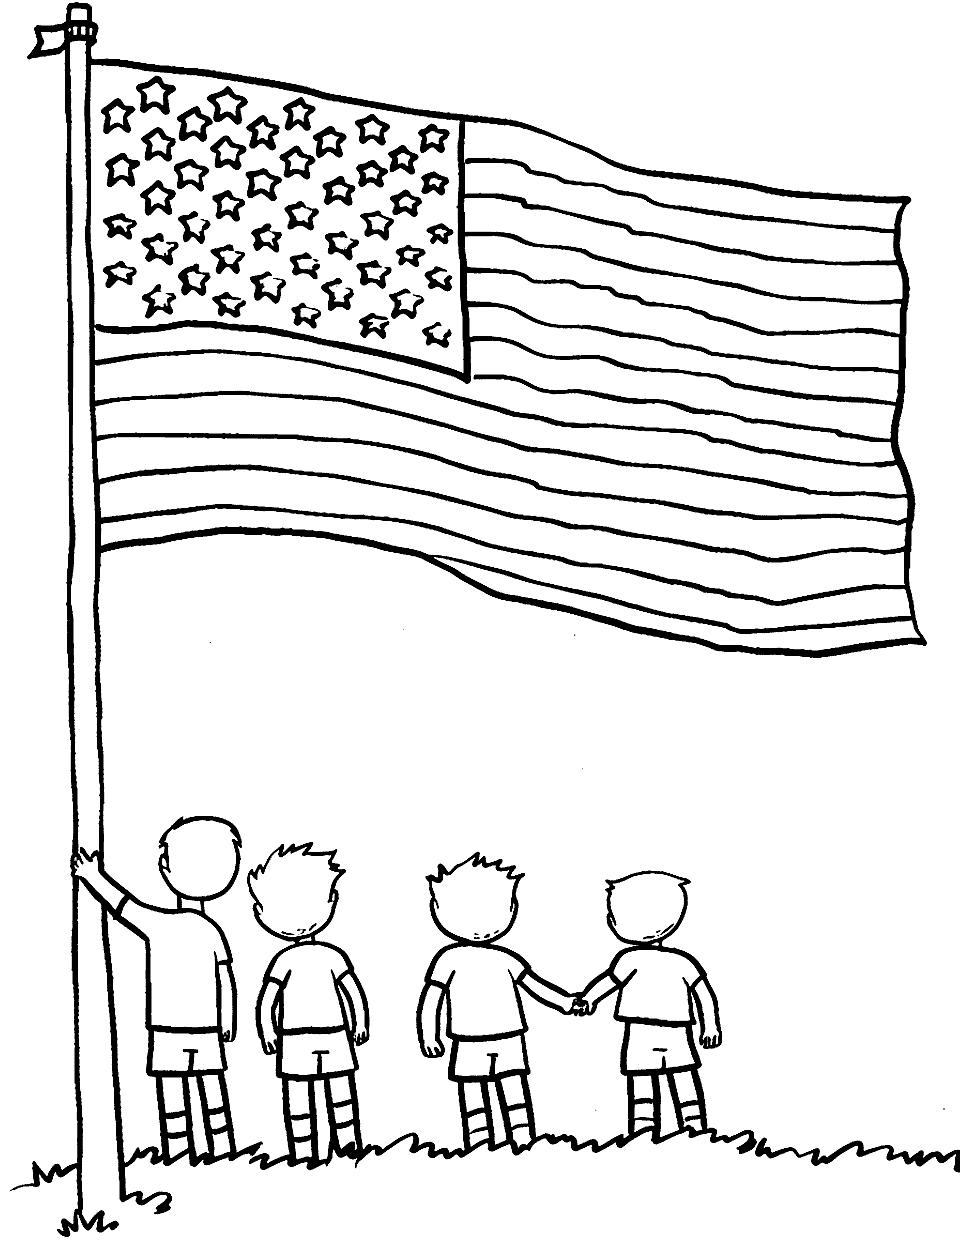 Flag Day Ceremony American Coloring Page - A Flag Day ceremony with children raising the American flag.